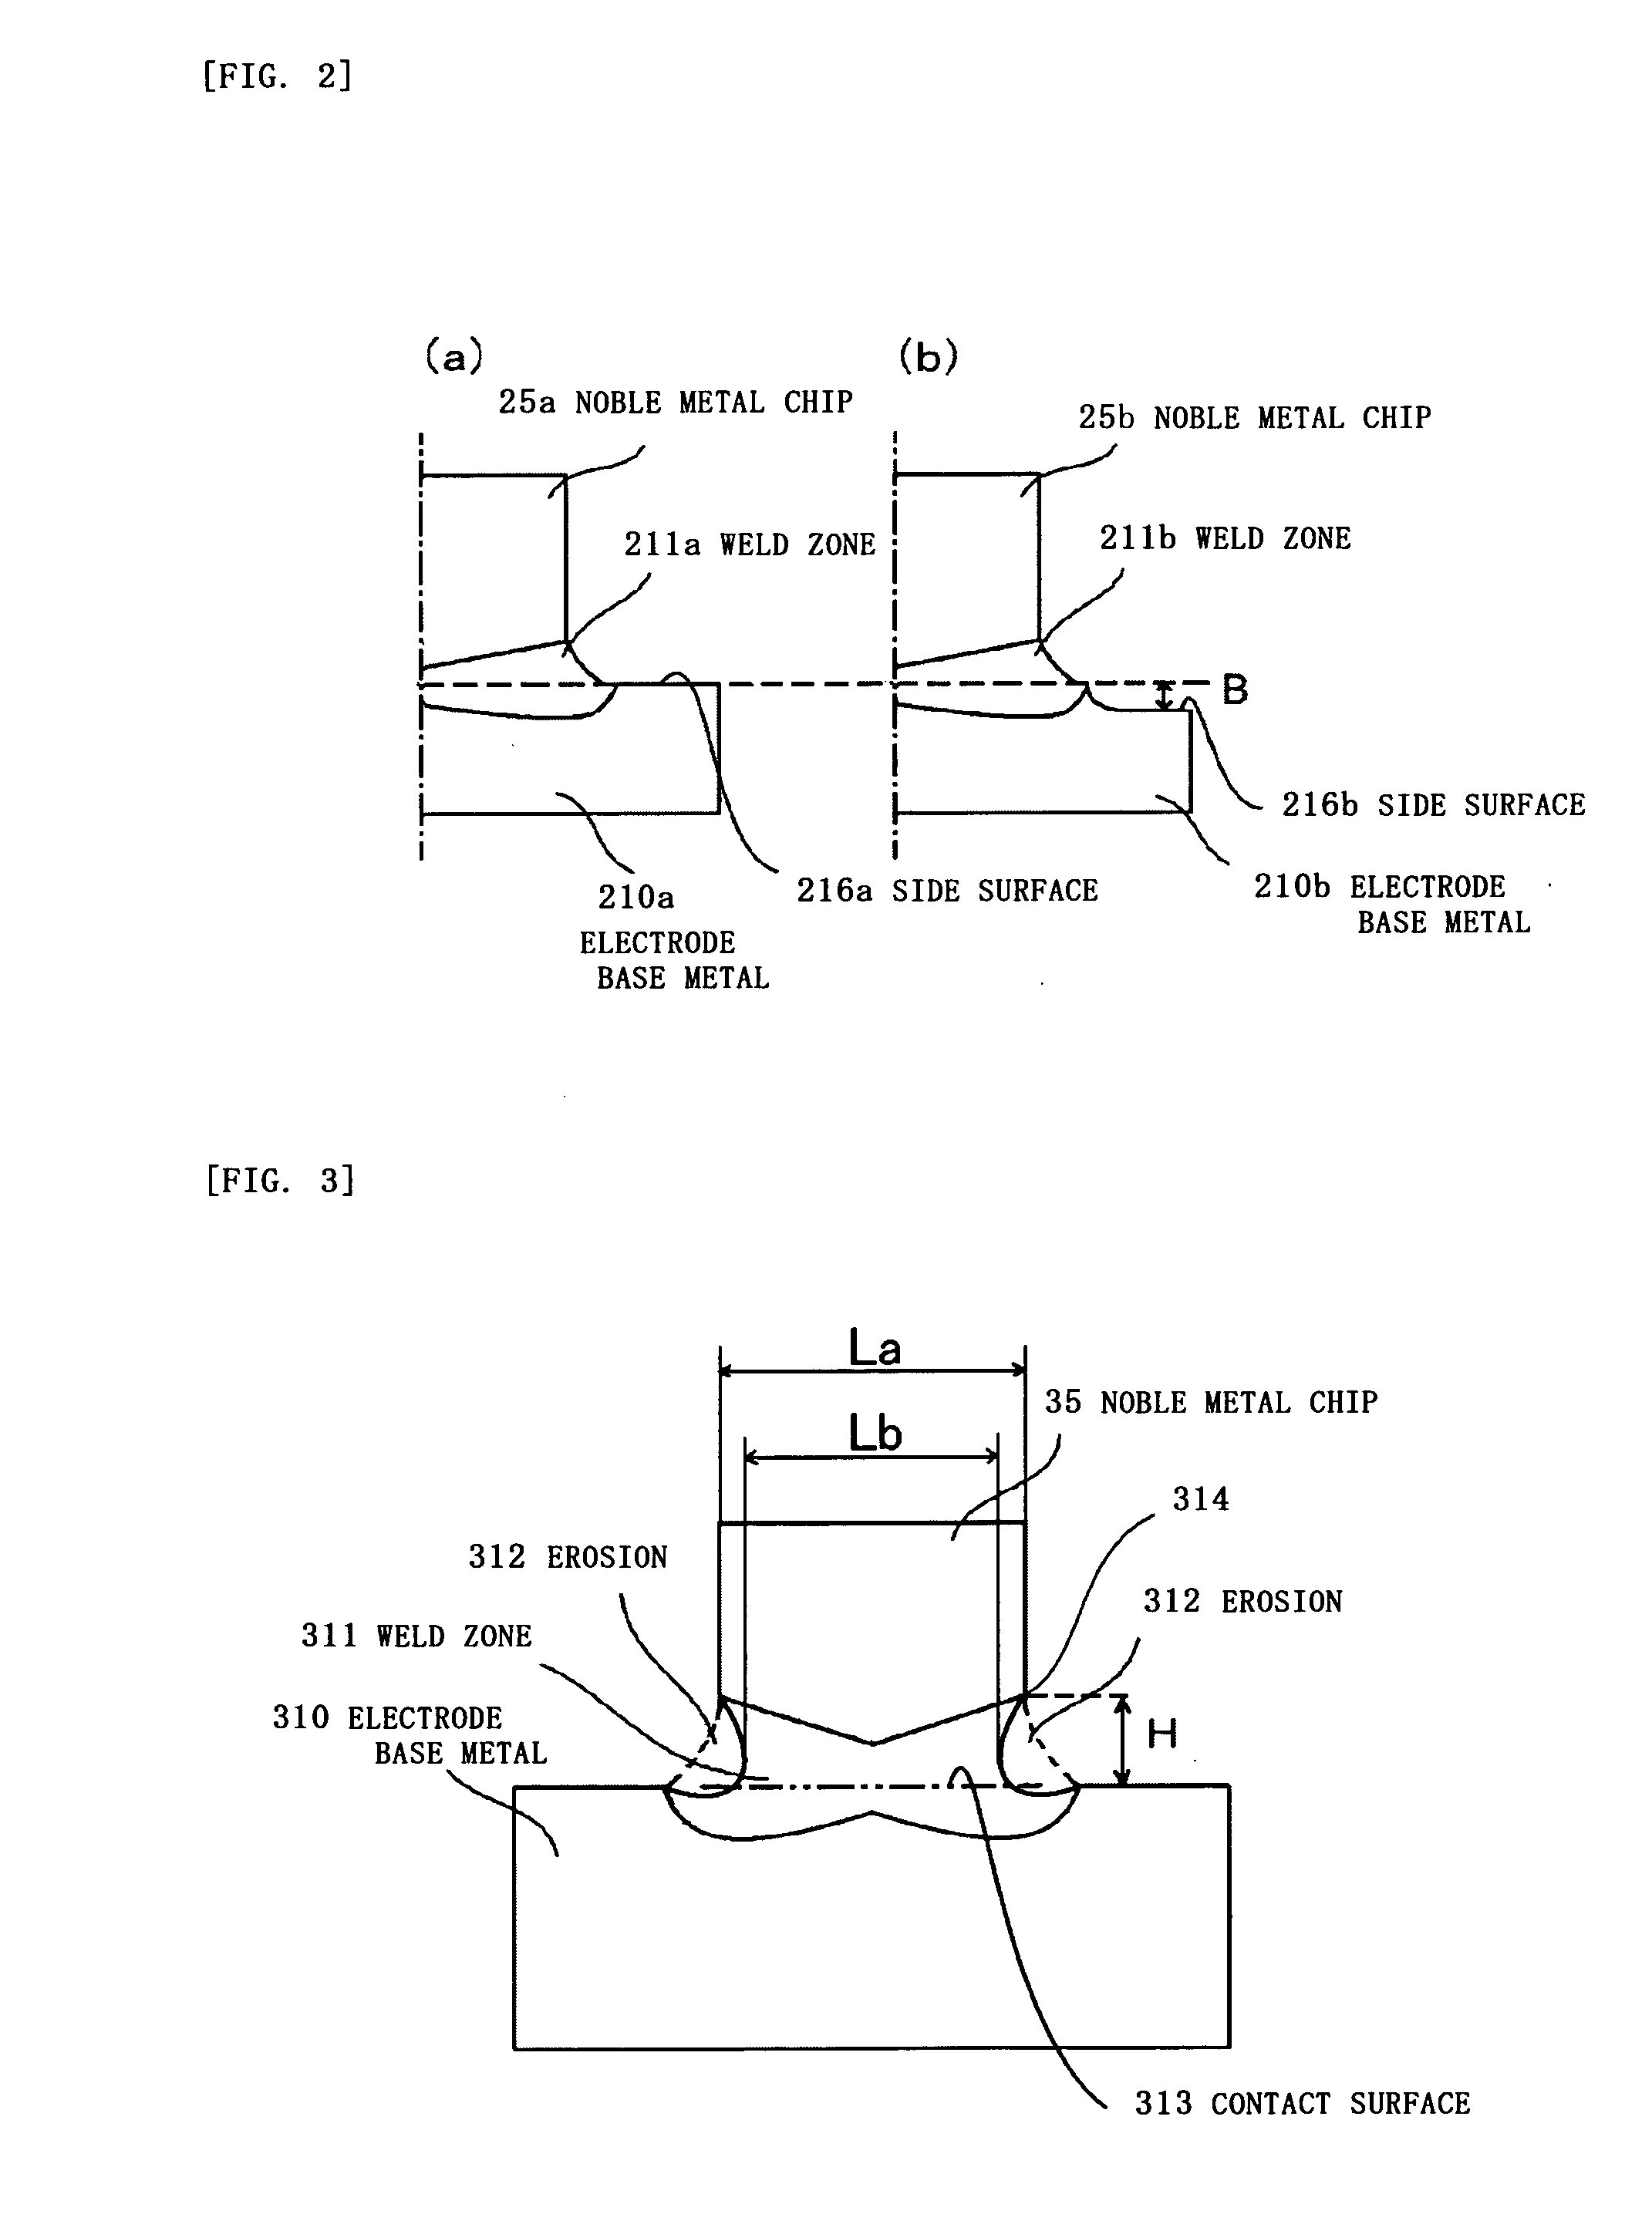 Spark plug and process for producing the spark plug